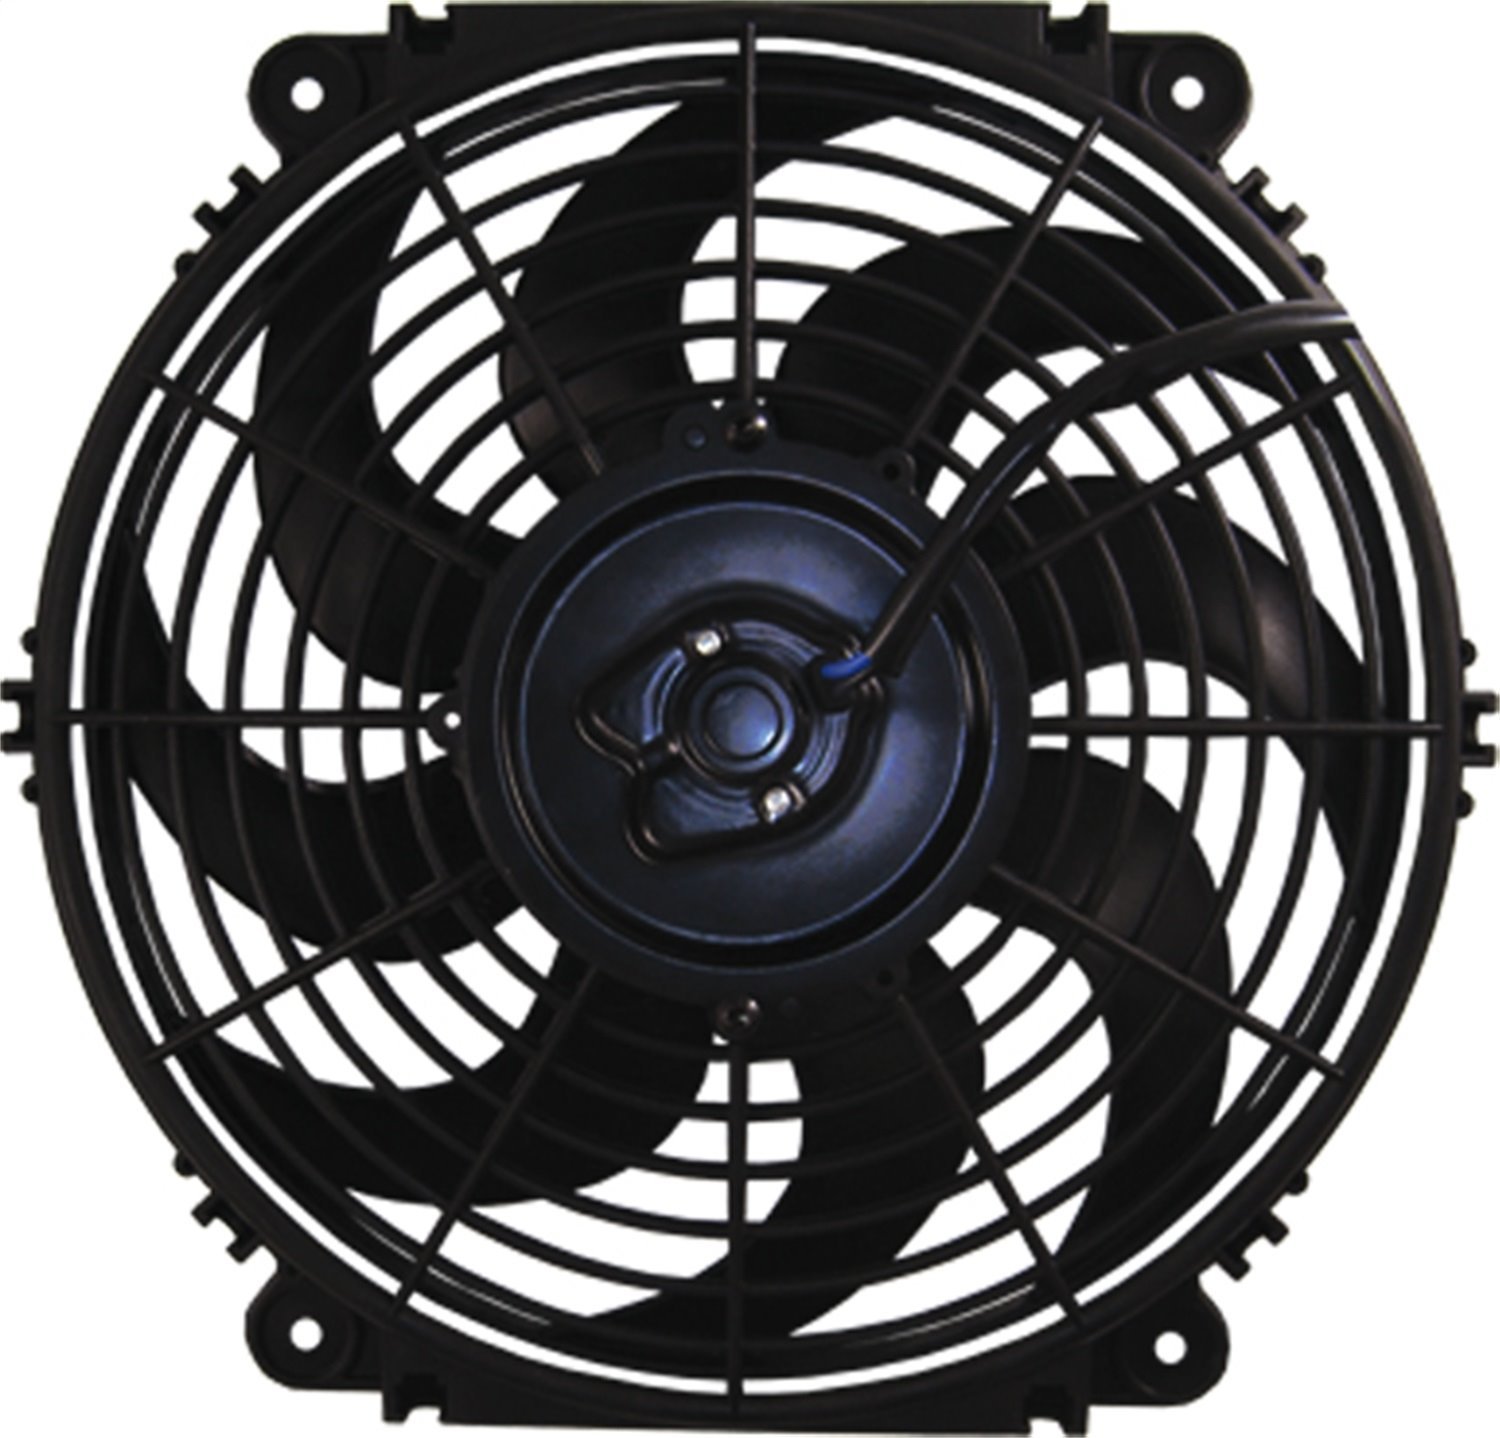 Pacesetter-Series Electric Cooling Fan, Diameter: 11 in., Type: Single